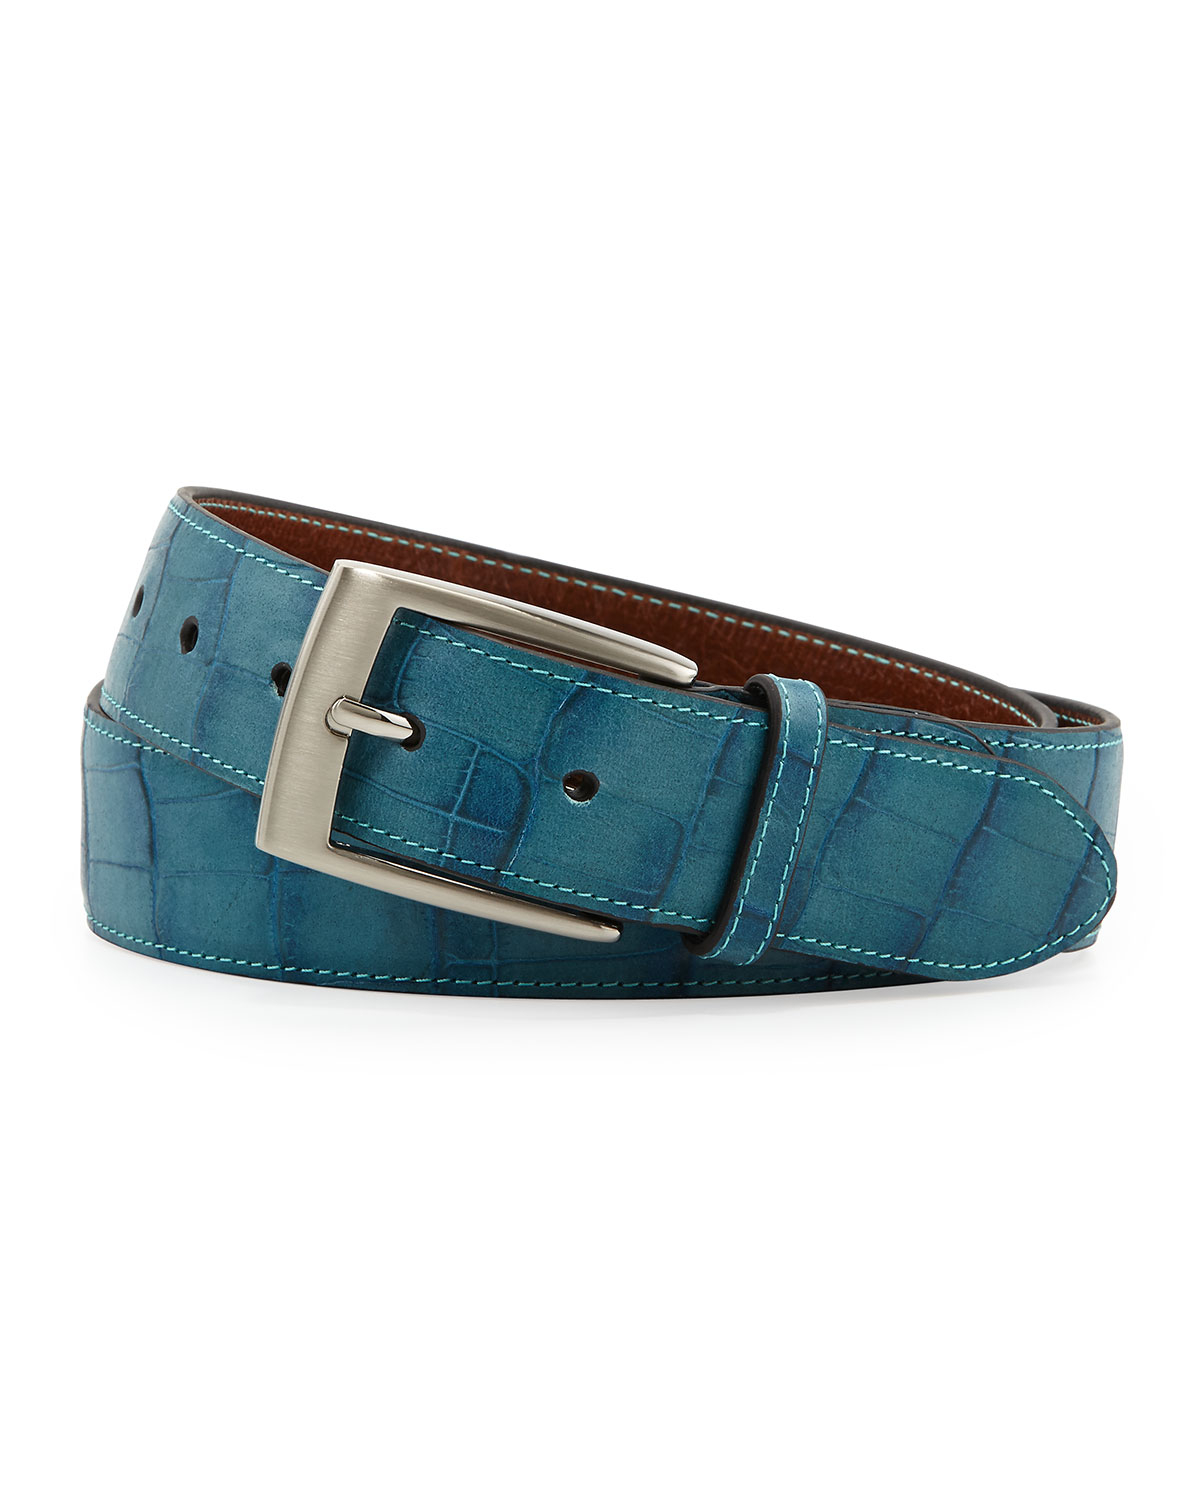 Lyst - Peter millar Fauxcroc Leather Belt in Blue for Men